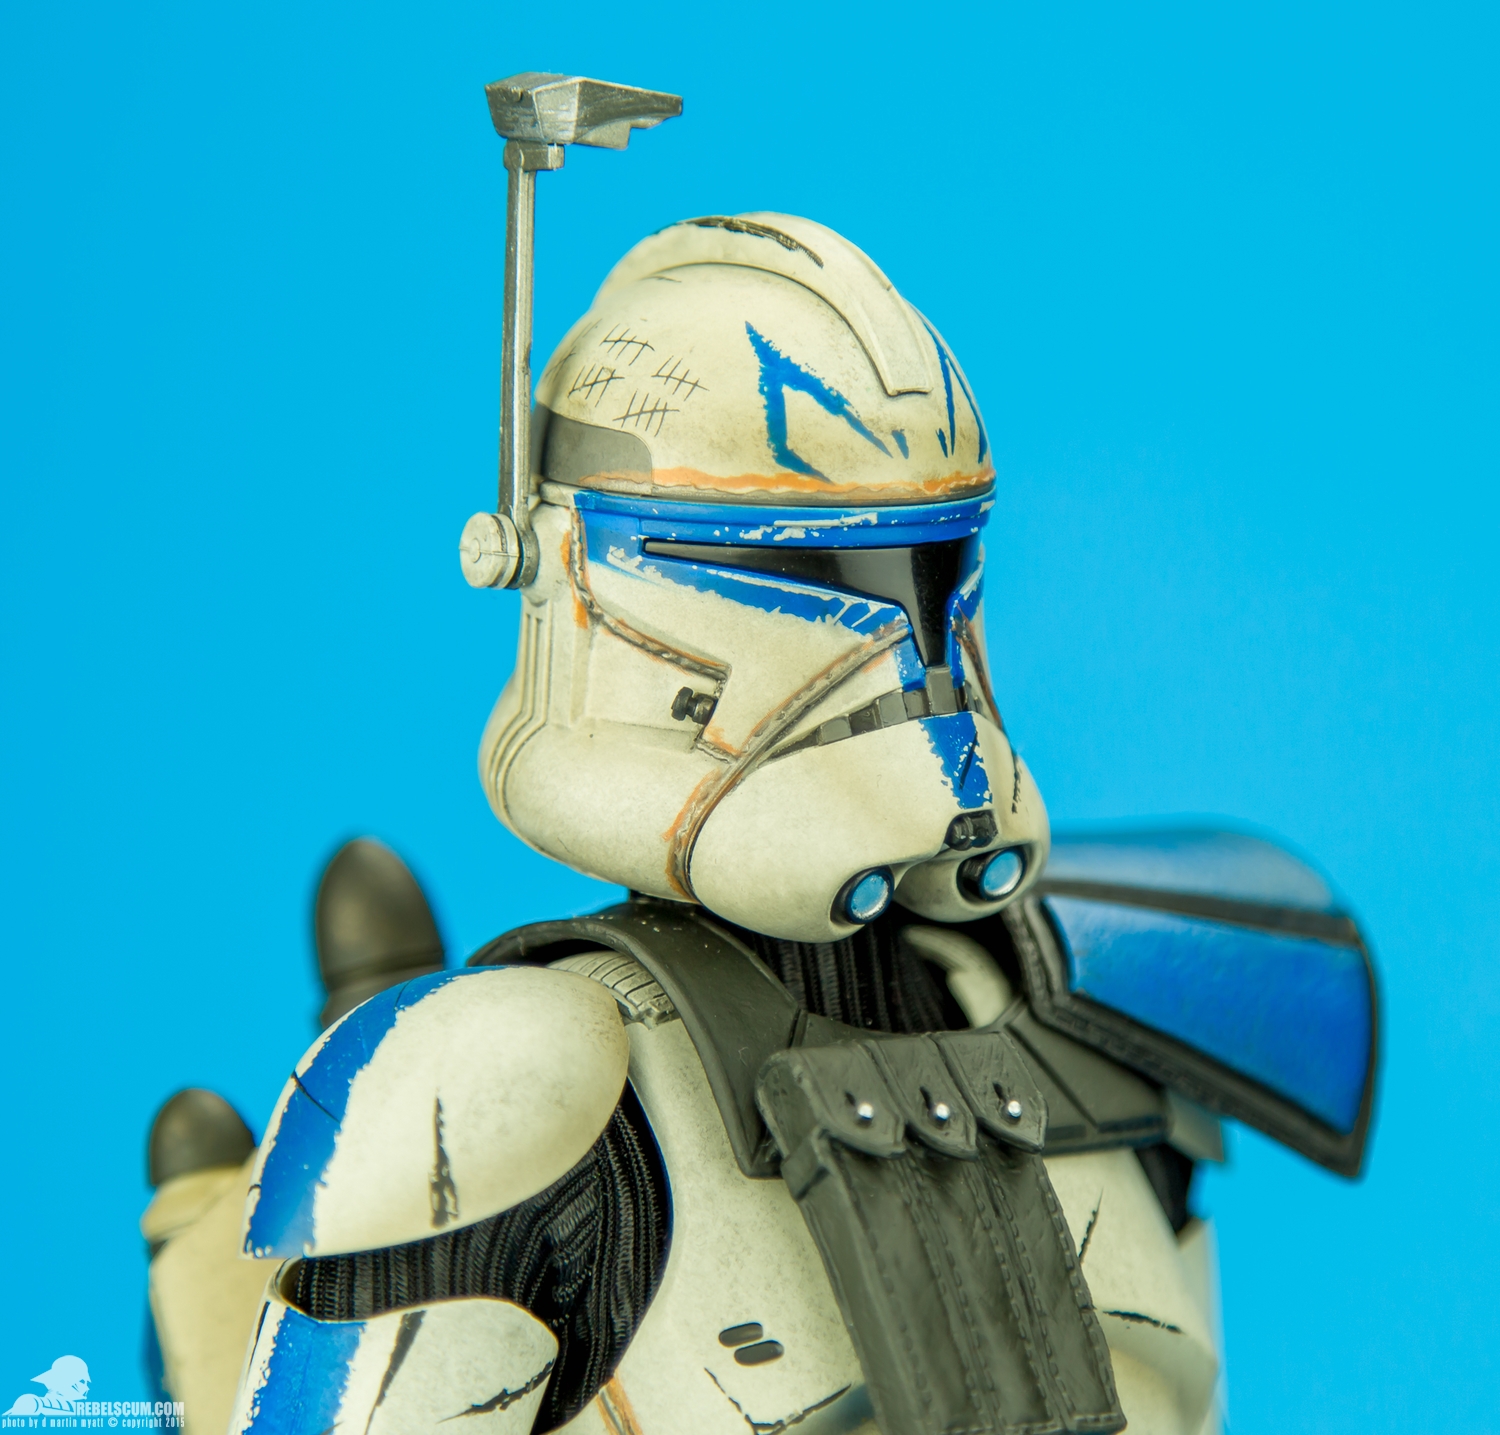 Captain-Rex-Phase-II-Sixth-Scale-Figure-Sideshow-Collectibles-010.jpg